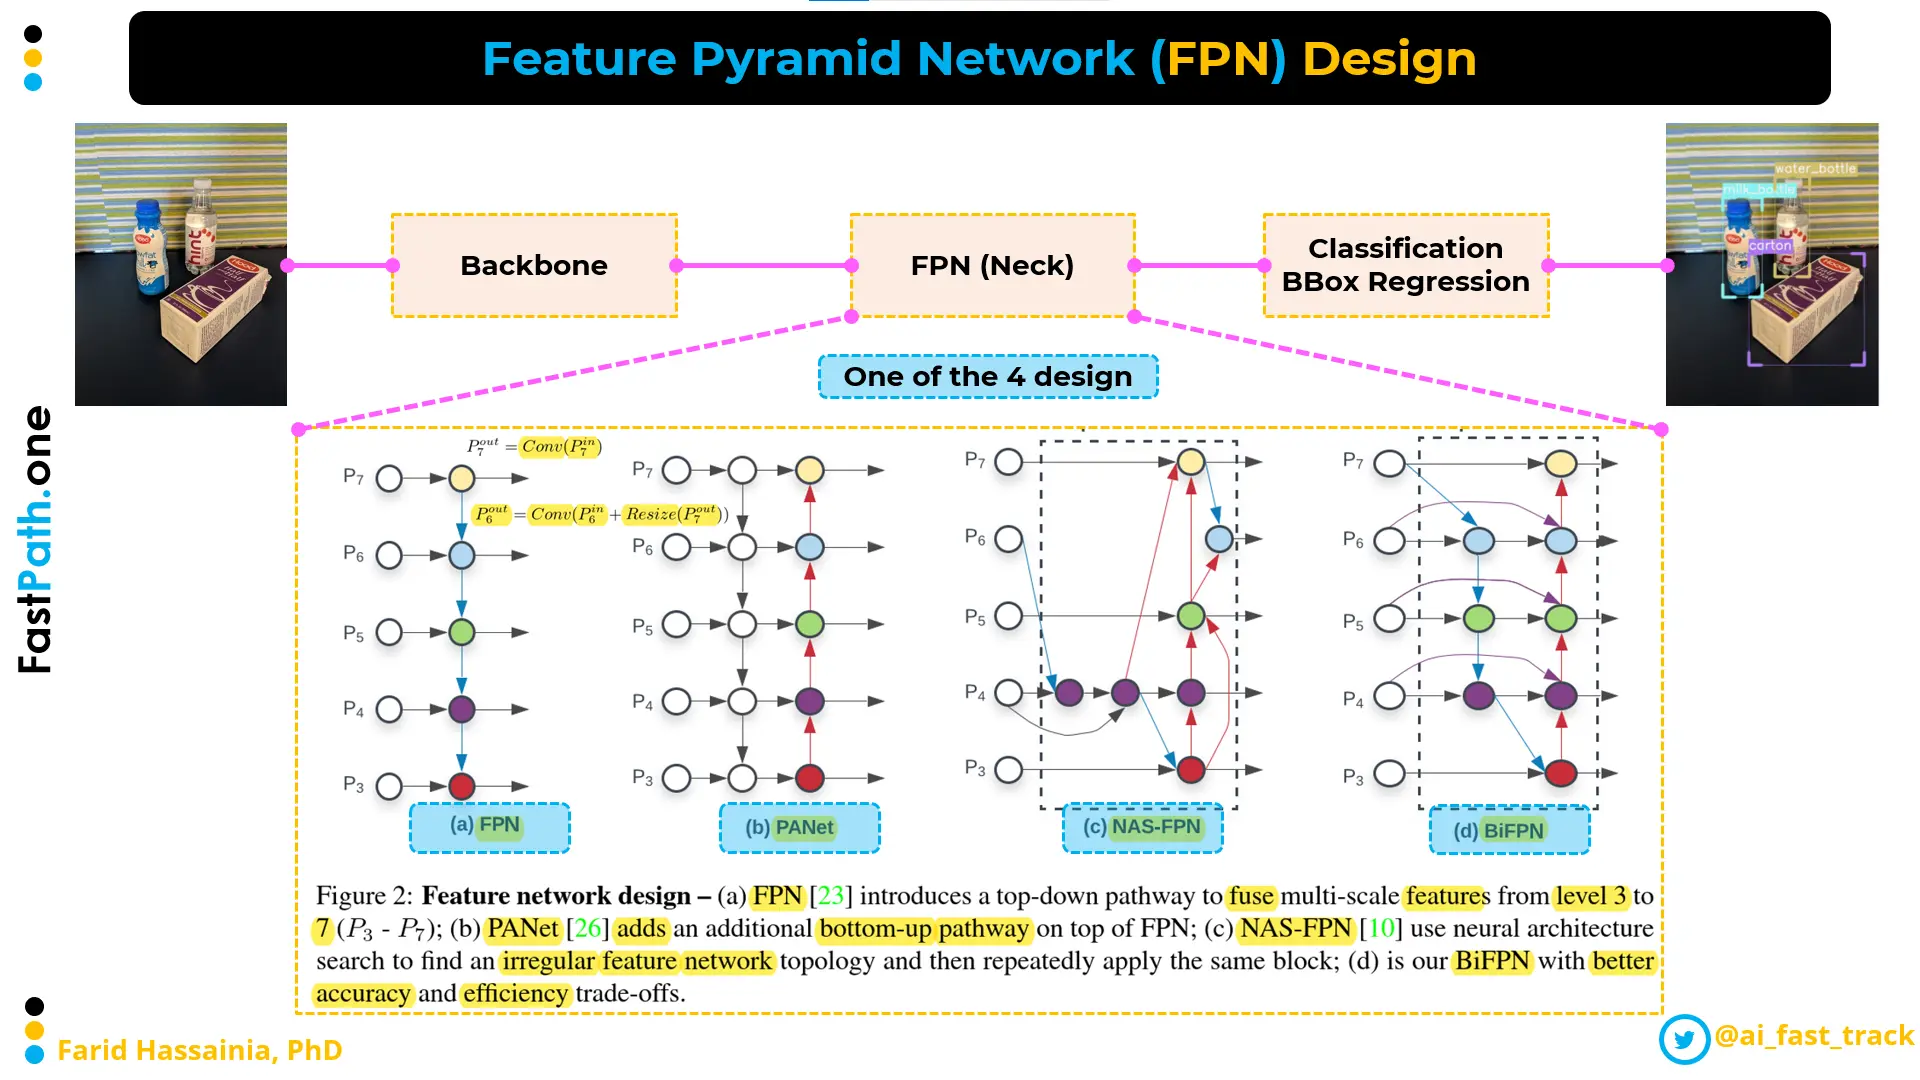 Feature Pyramid Network (FPN) is also knows as Neck in object detection architecture